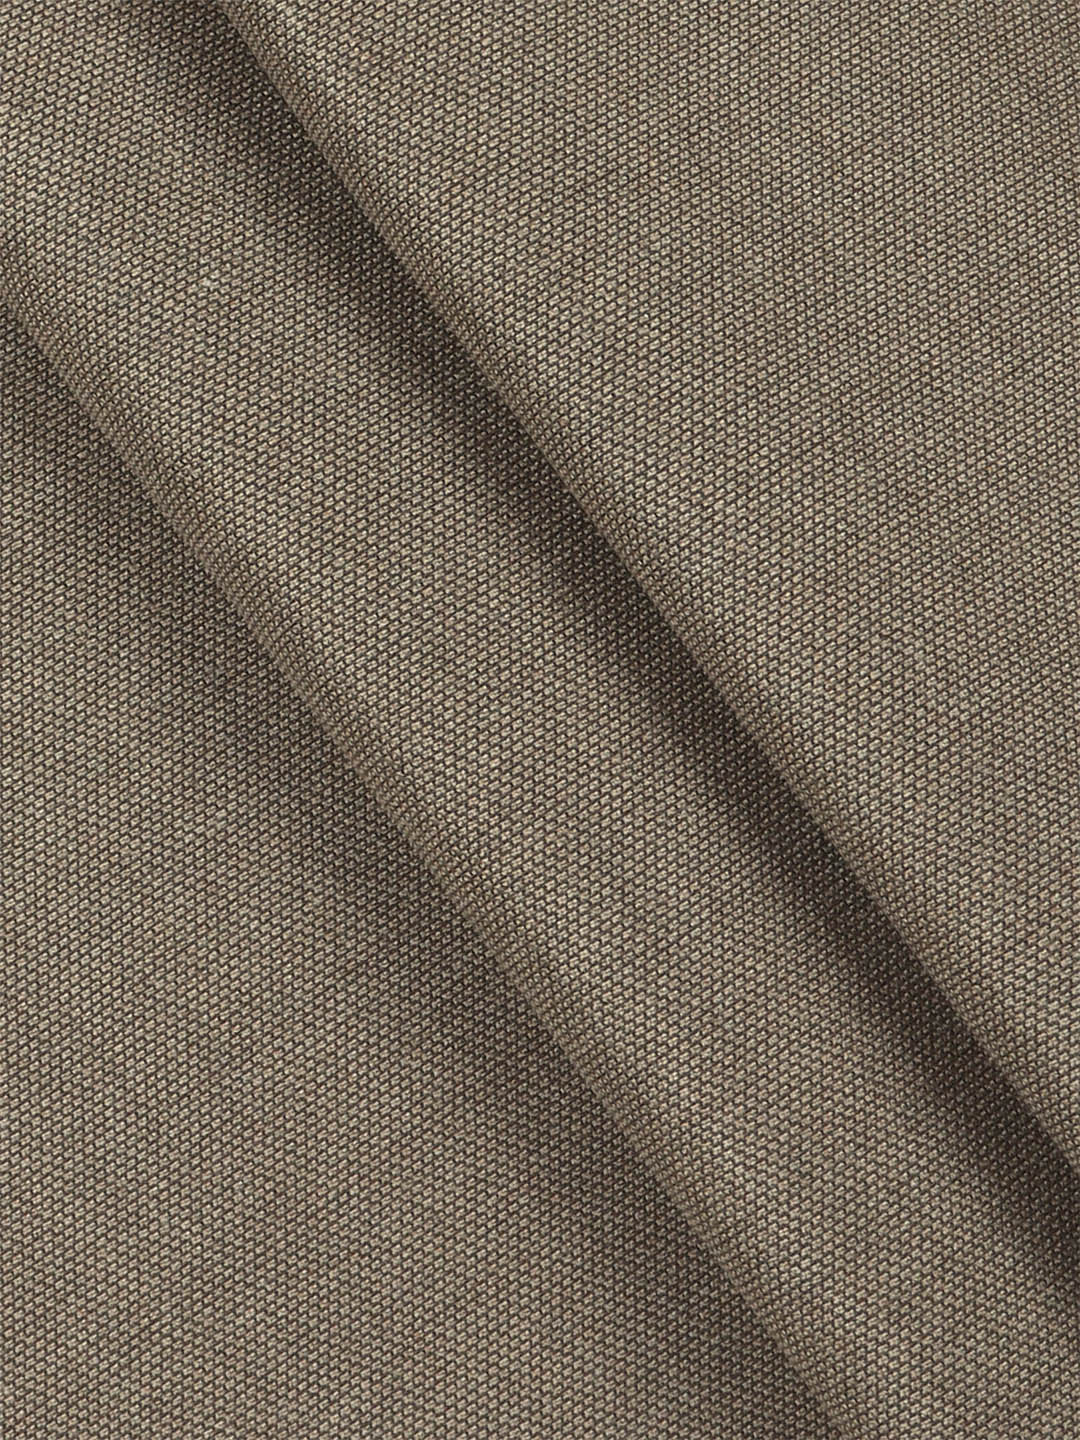 Cotton Super Stretch Brown Suiting Fabric-Icle Stretch